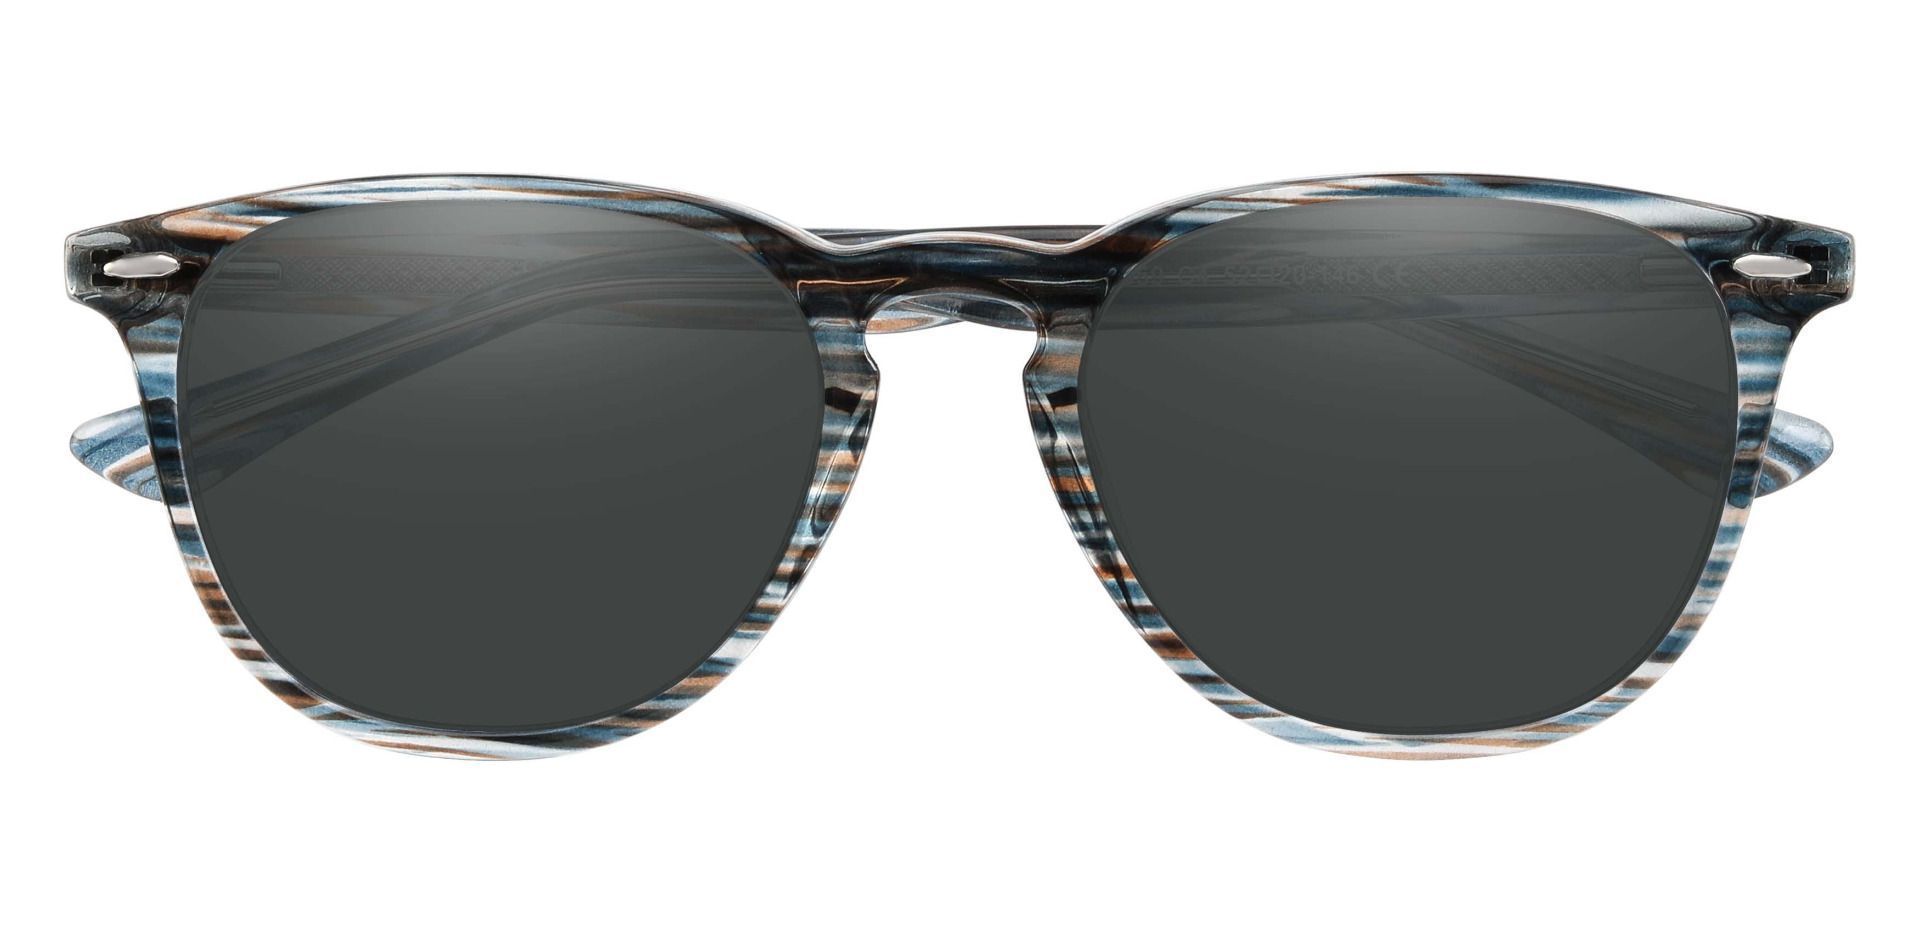 Sycamore Oval Non-Rx Sunglasses - Blue Frame With Gray Lenses